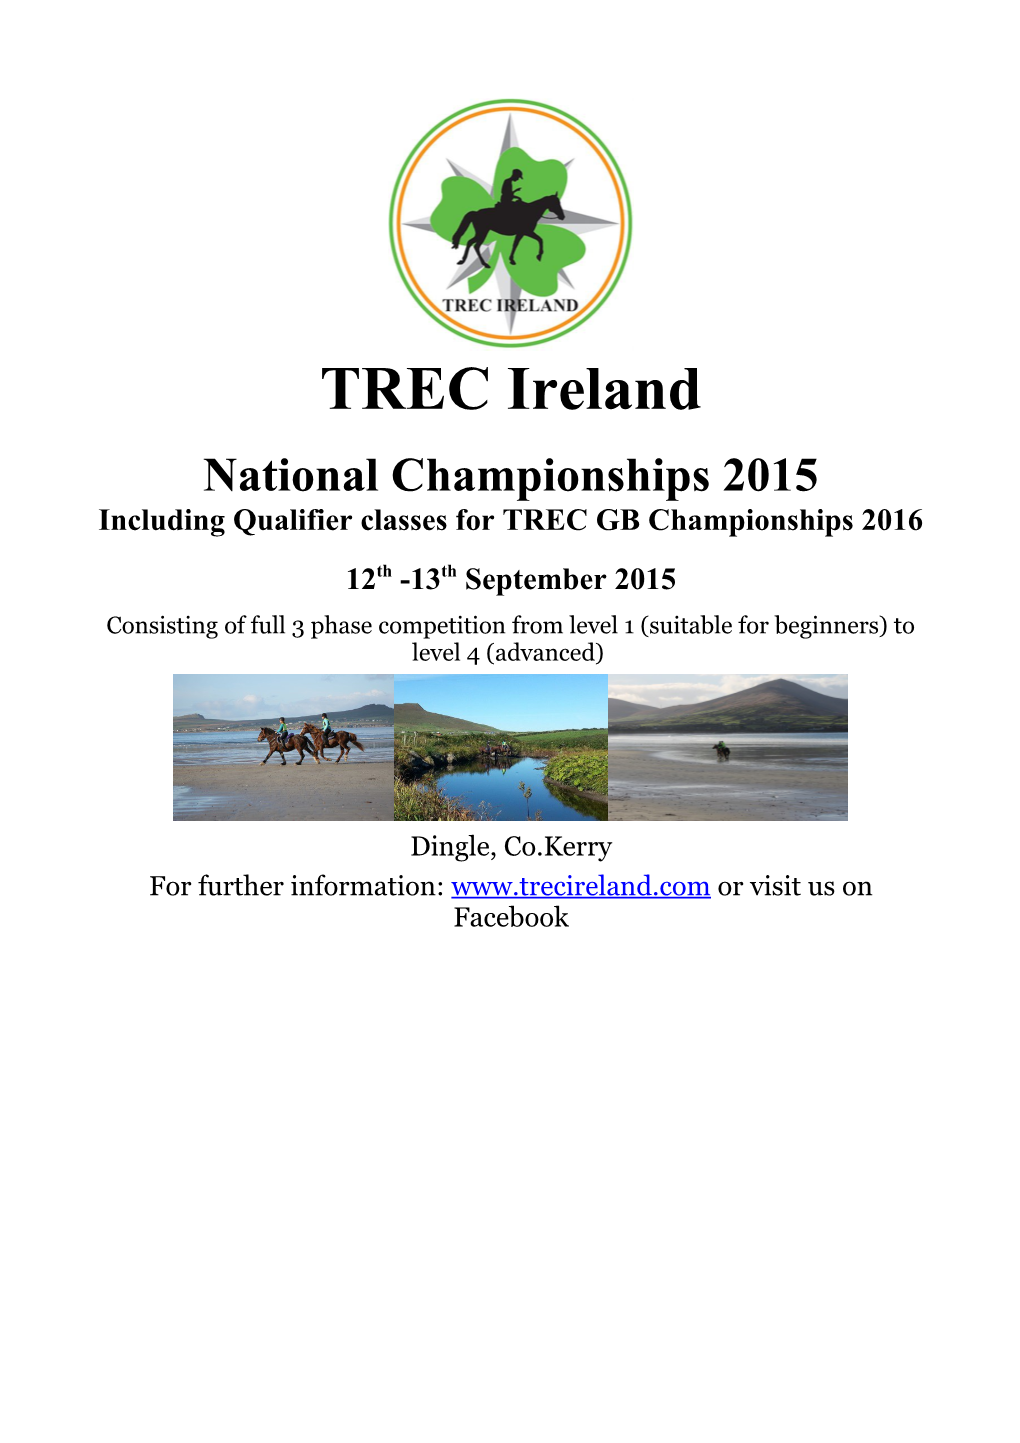 Including Qualifier Classes for TREC GB Championships 2016